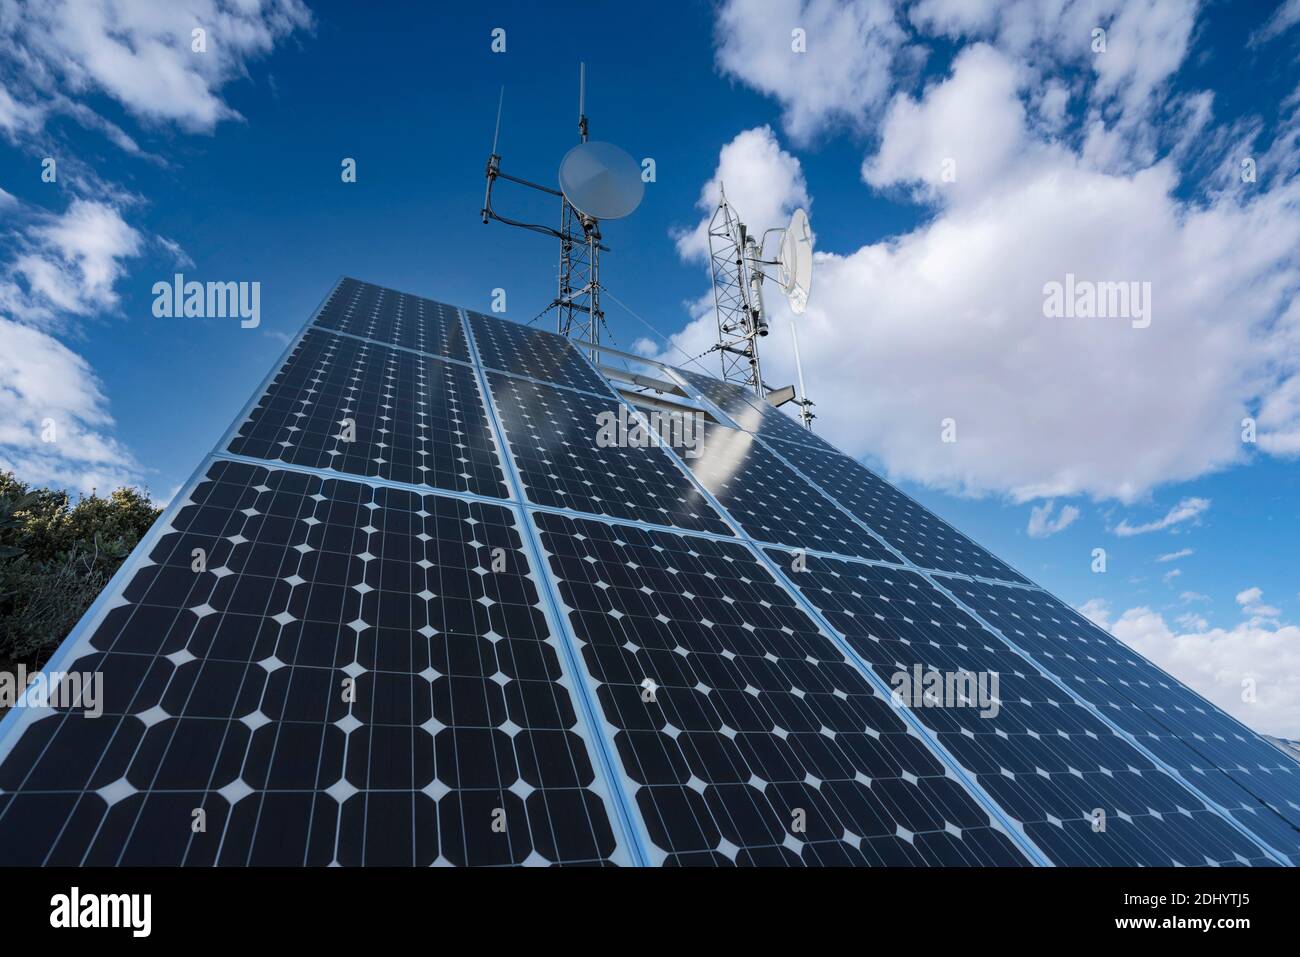 Solar communication equipment with partly cloudy sky in the Angeles National Forest near Los Angeles, California. Stock Photo